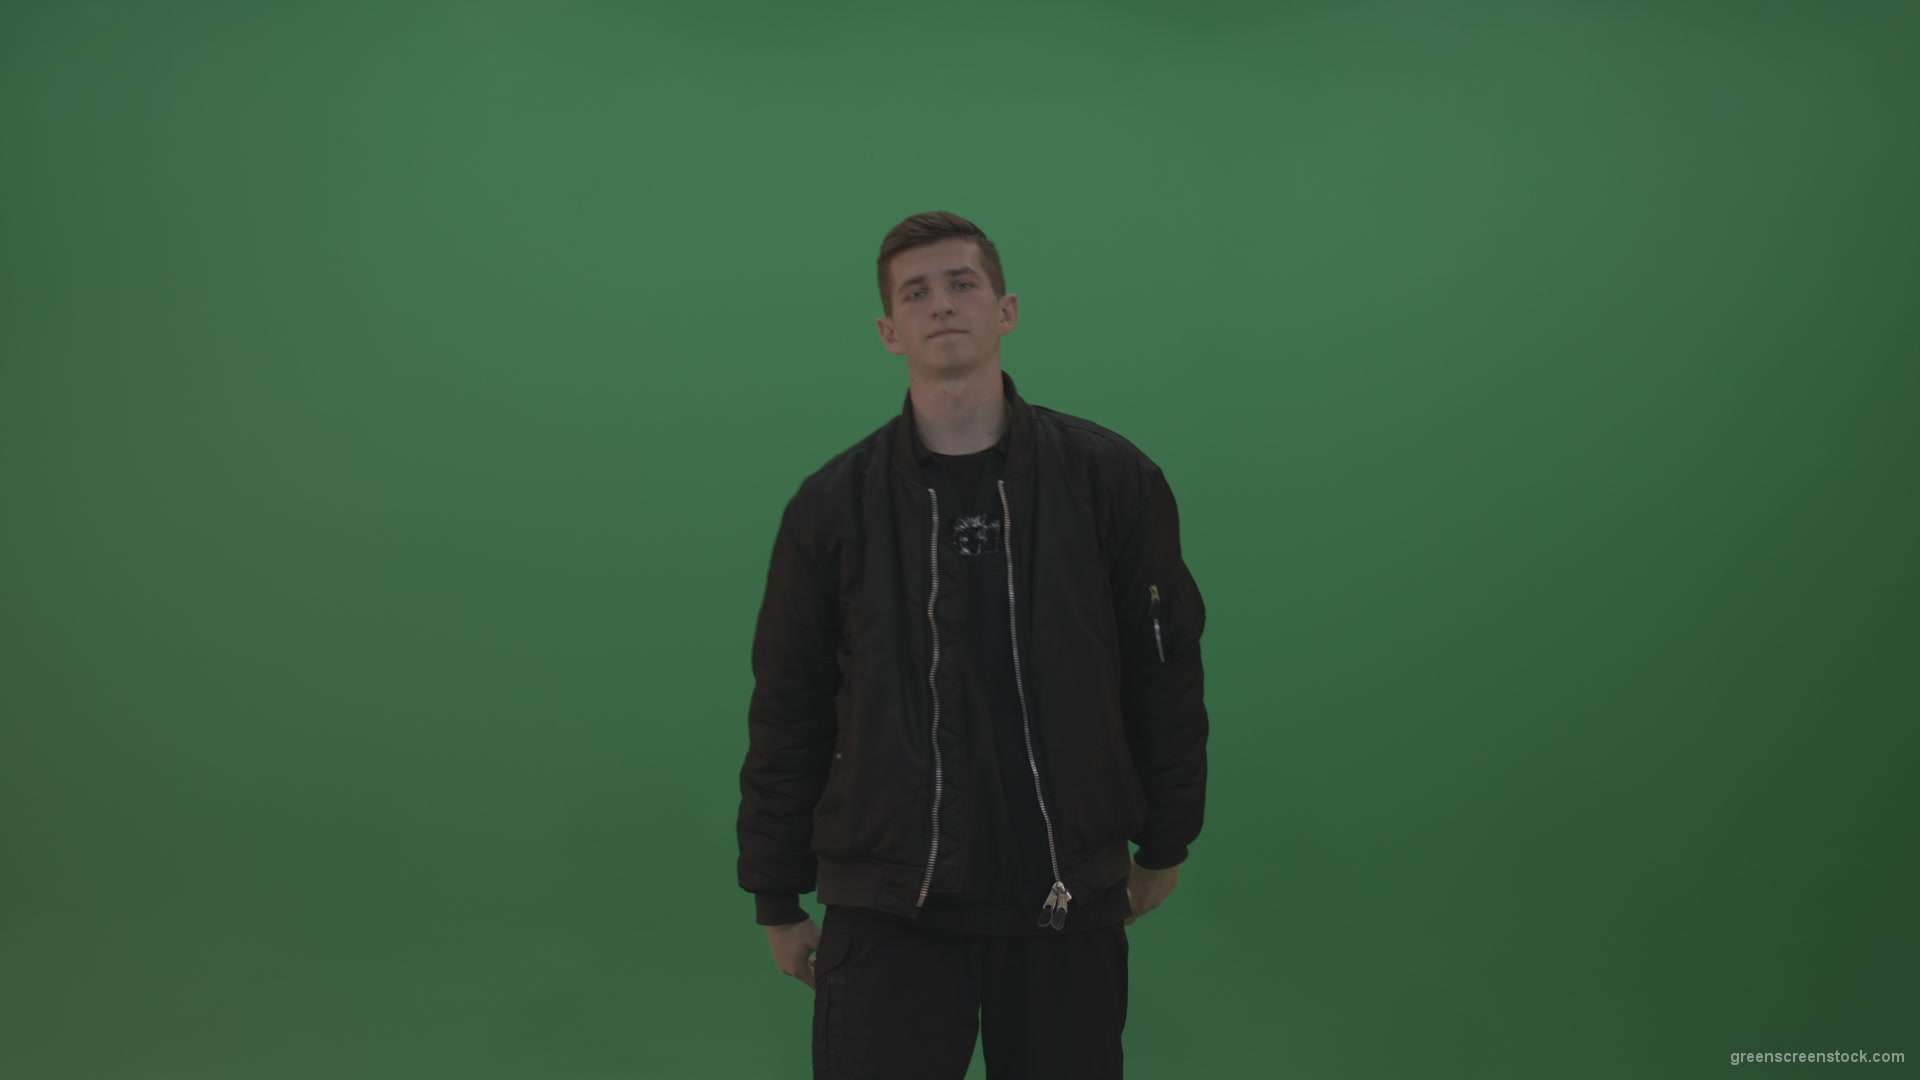 Boy-in-black-wear-displays-the-kill-sign-and-two-middle-fingers-in-the-air-over-chromakey-background_009 Green Screen Stock